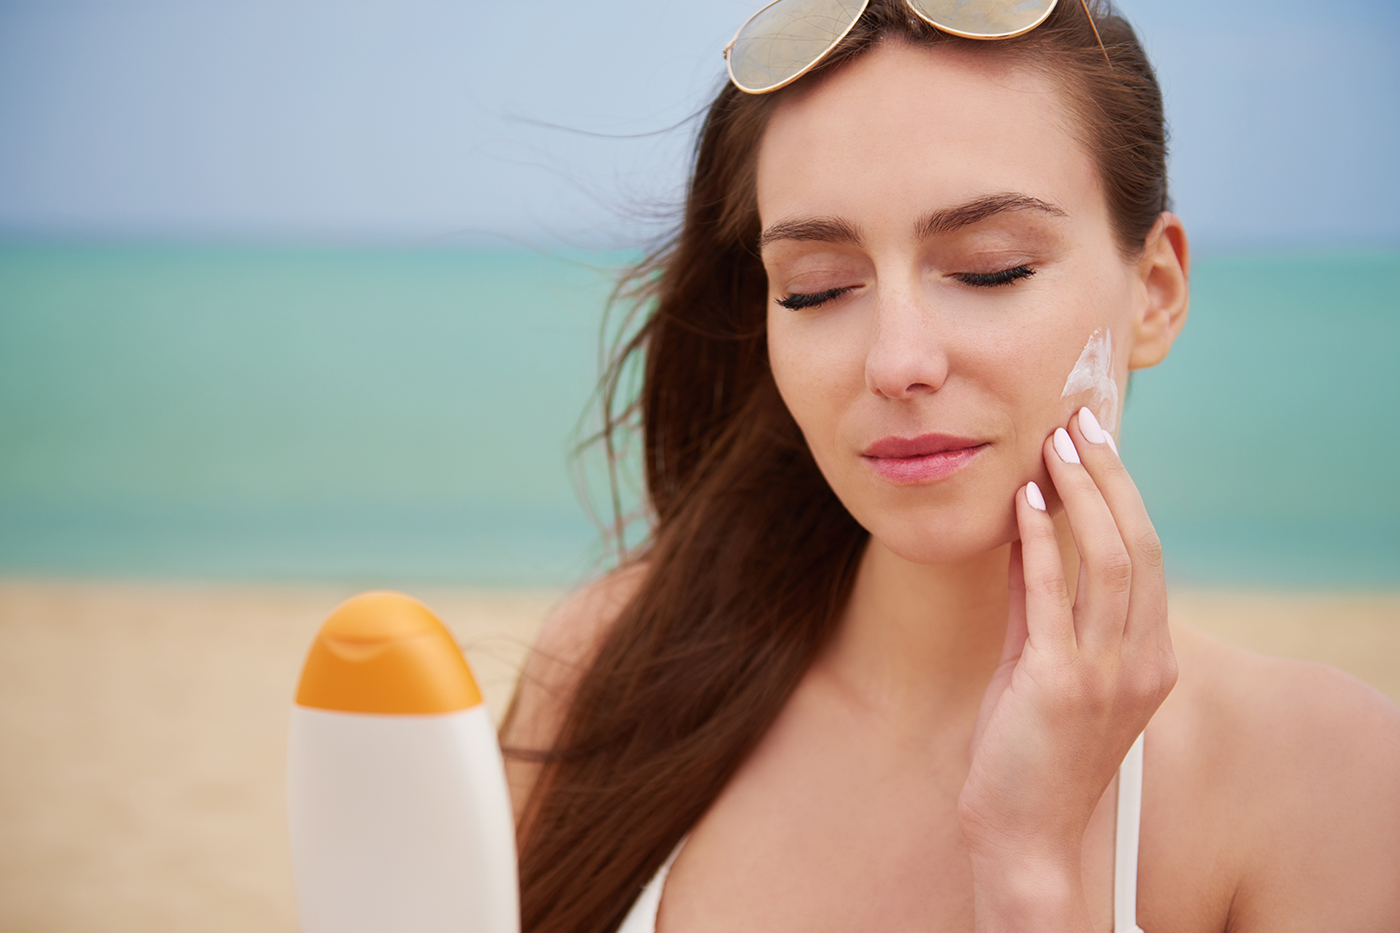 Negative news about safety of sunscreens affects consumer confidence